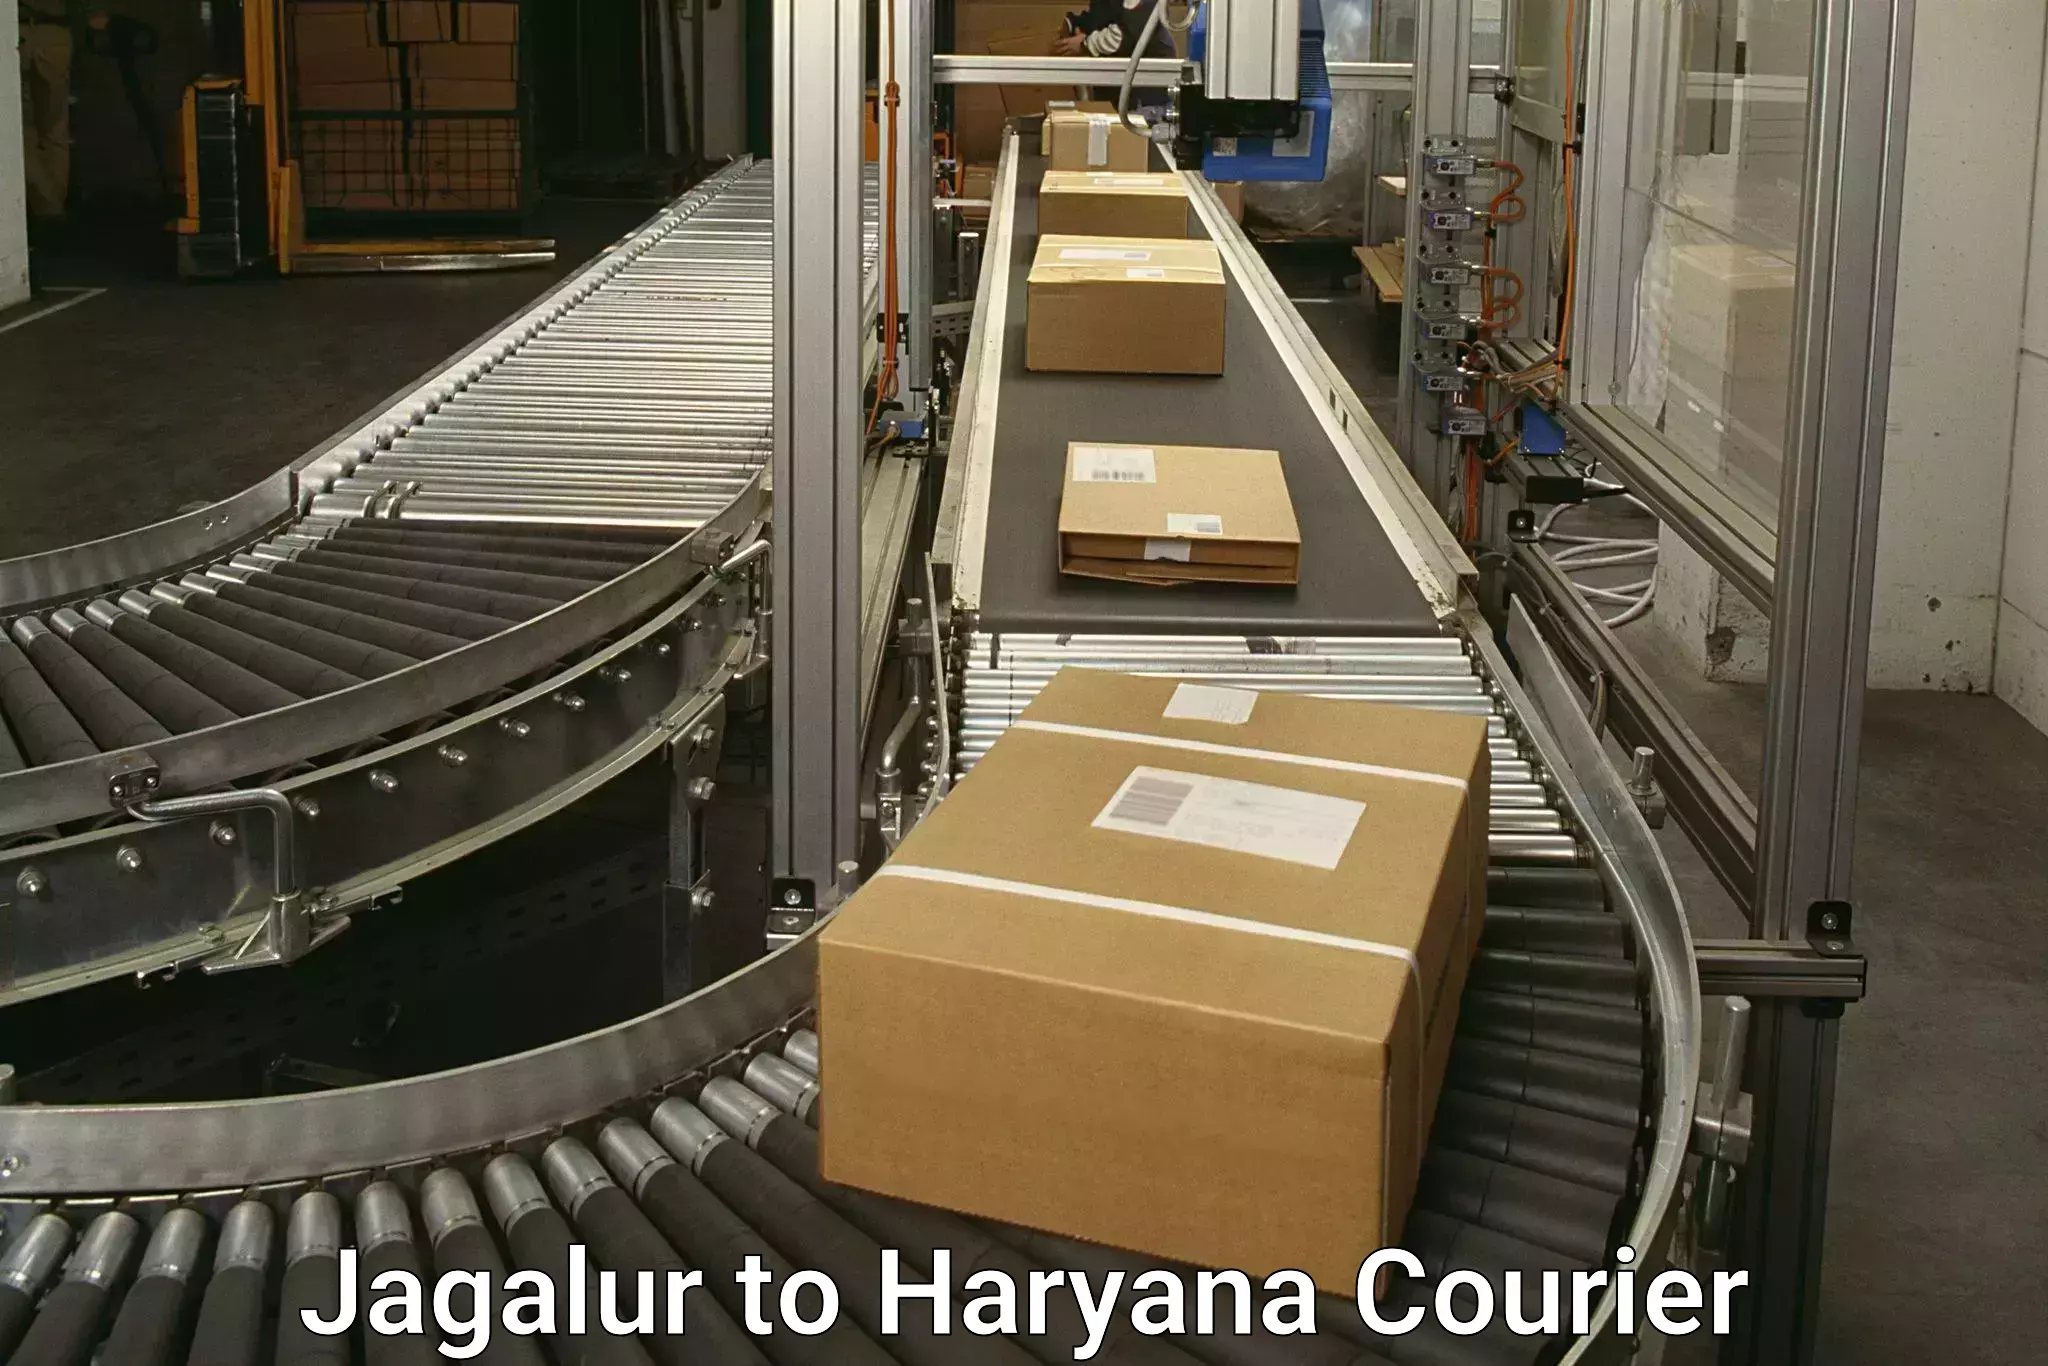 Full-service courier options Jagalur to NCR Haryana